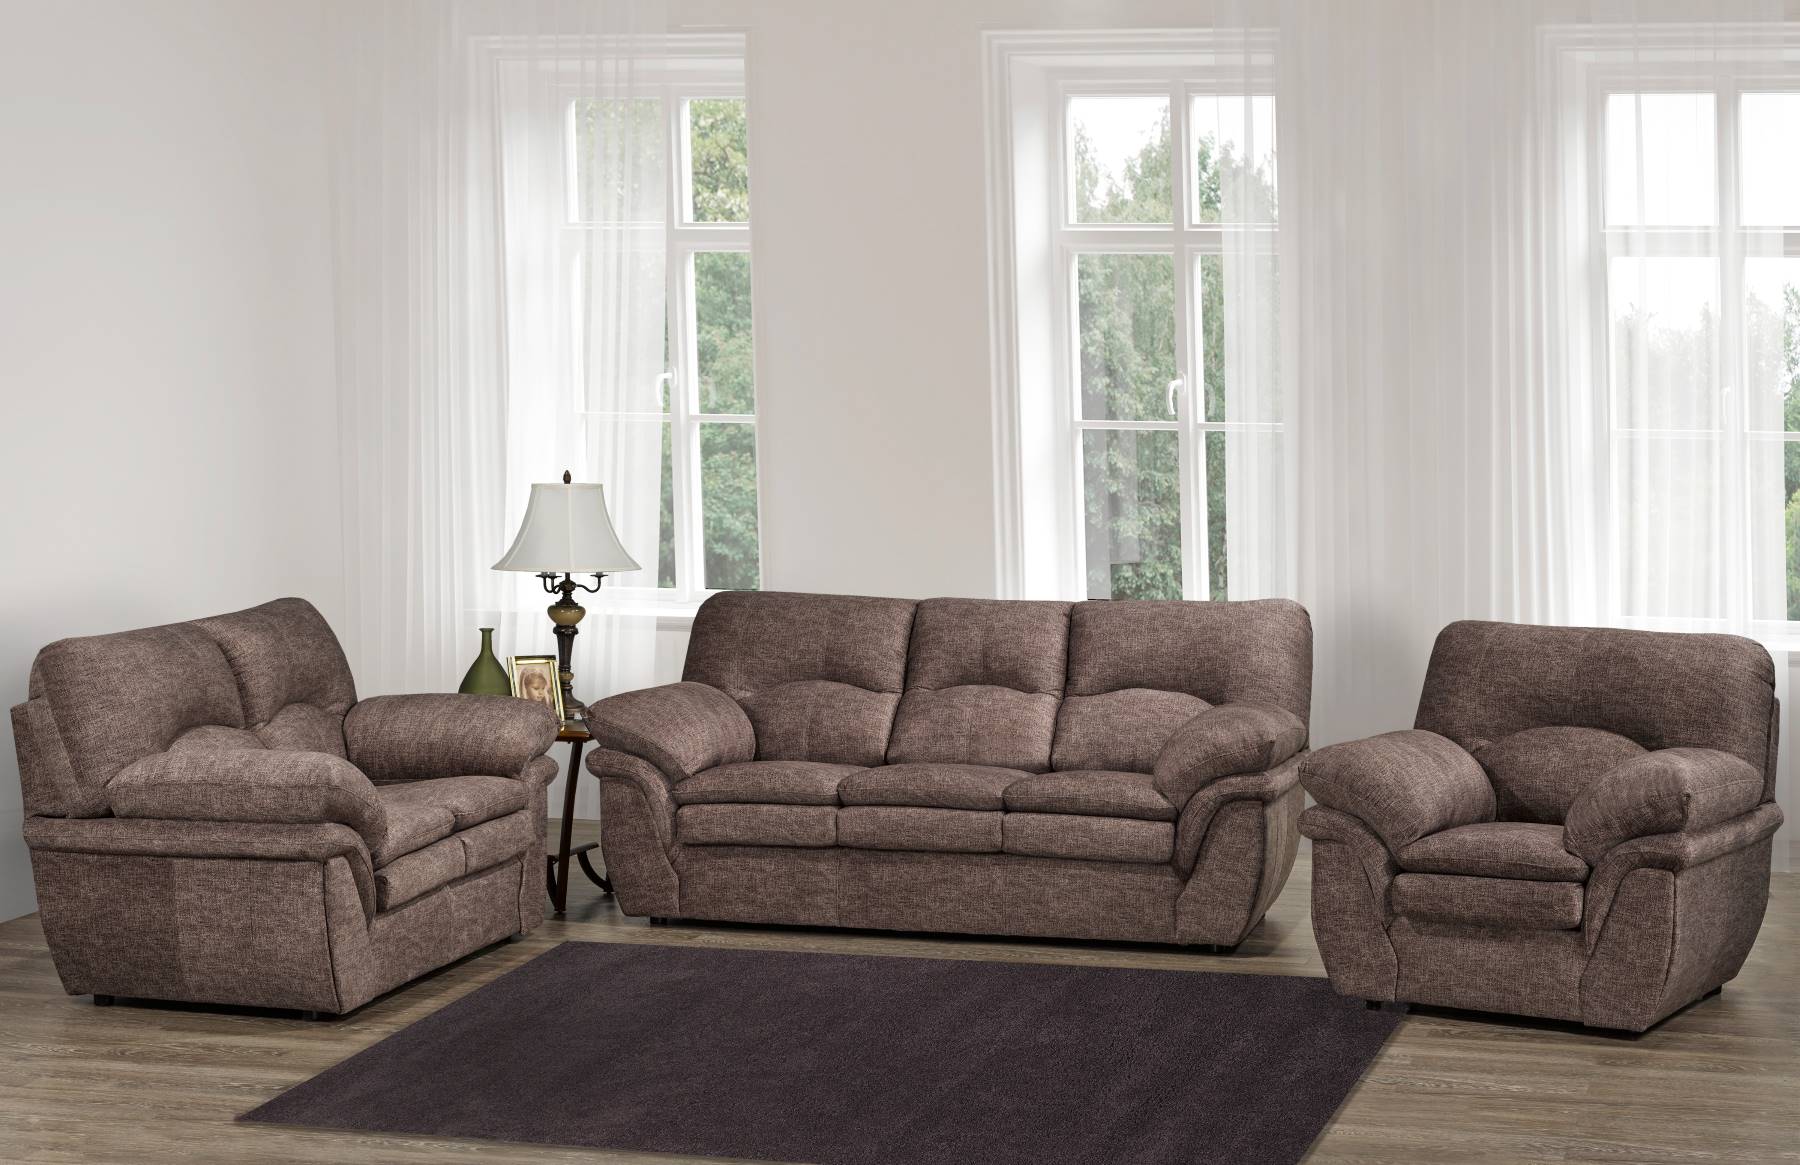 Canadian Made Lovey's Mocha Sofa Collection 6050